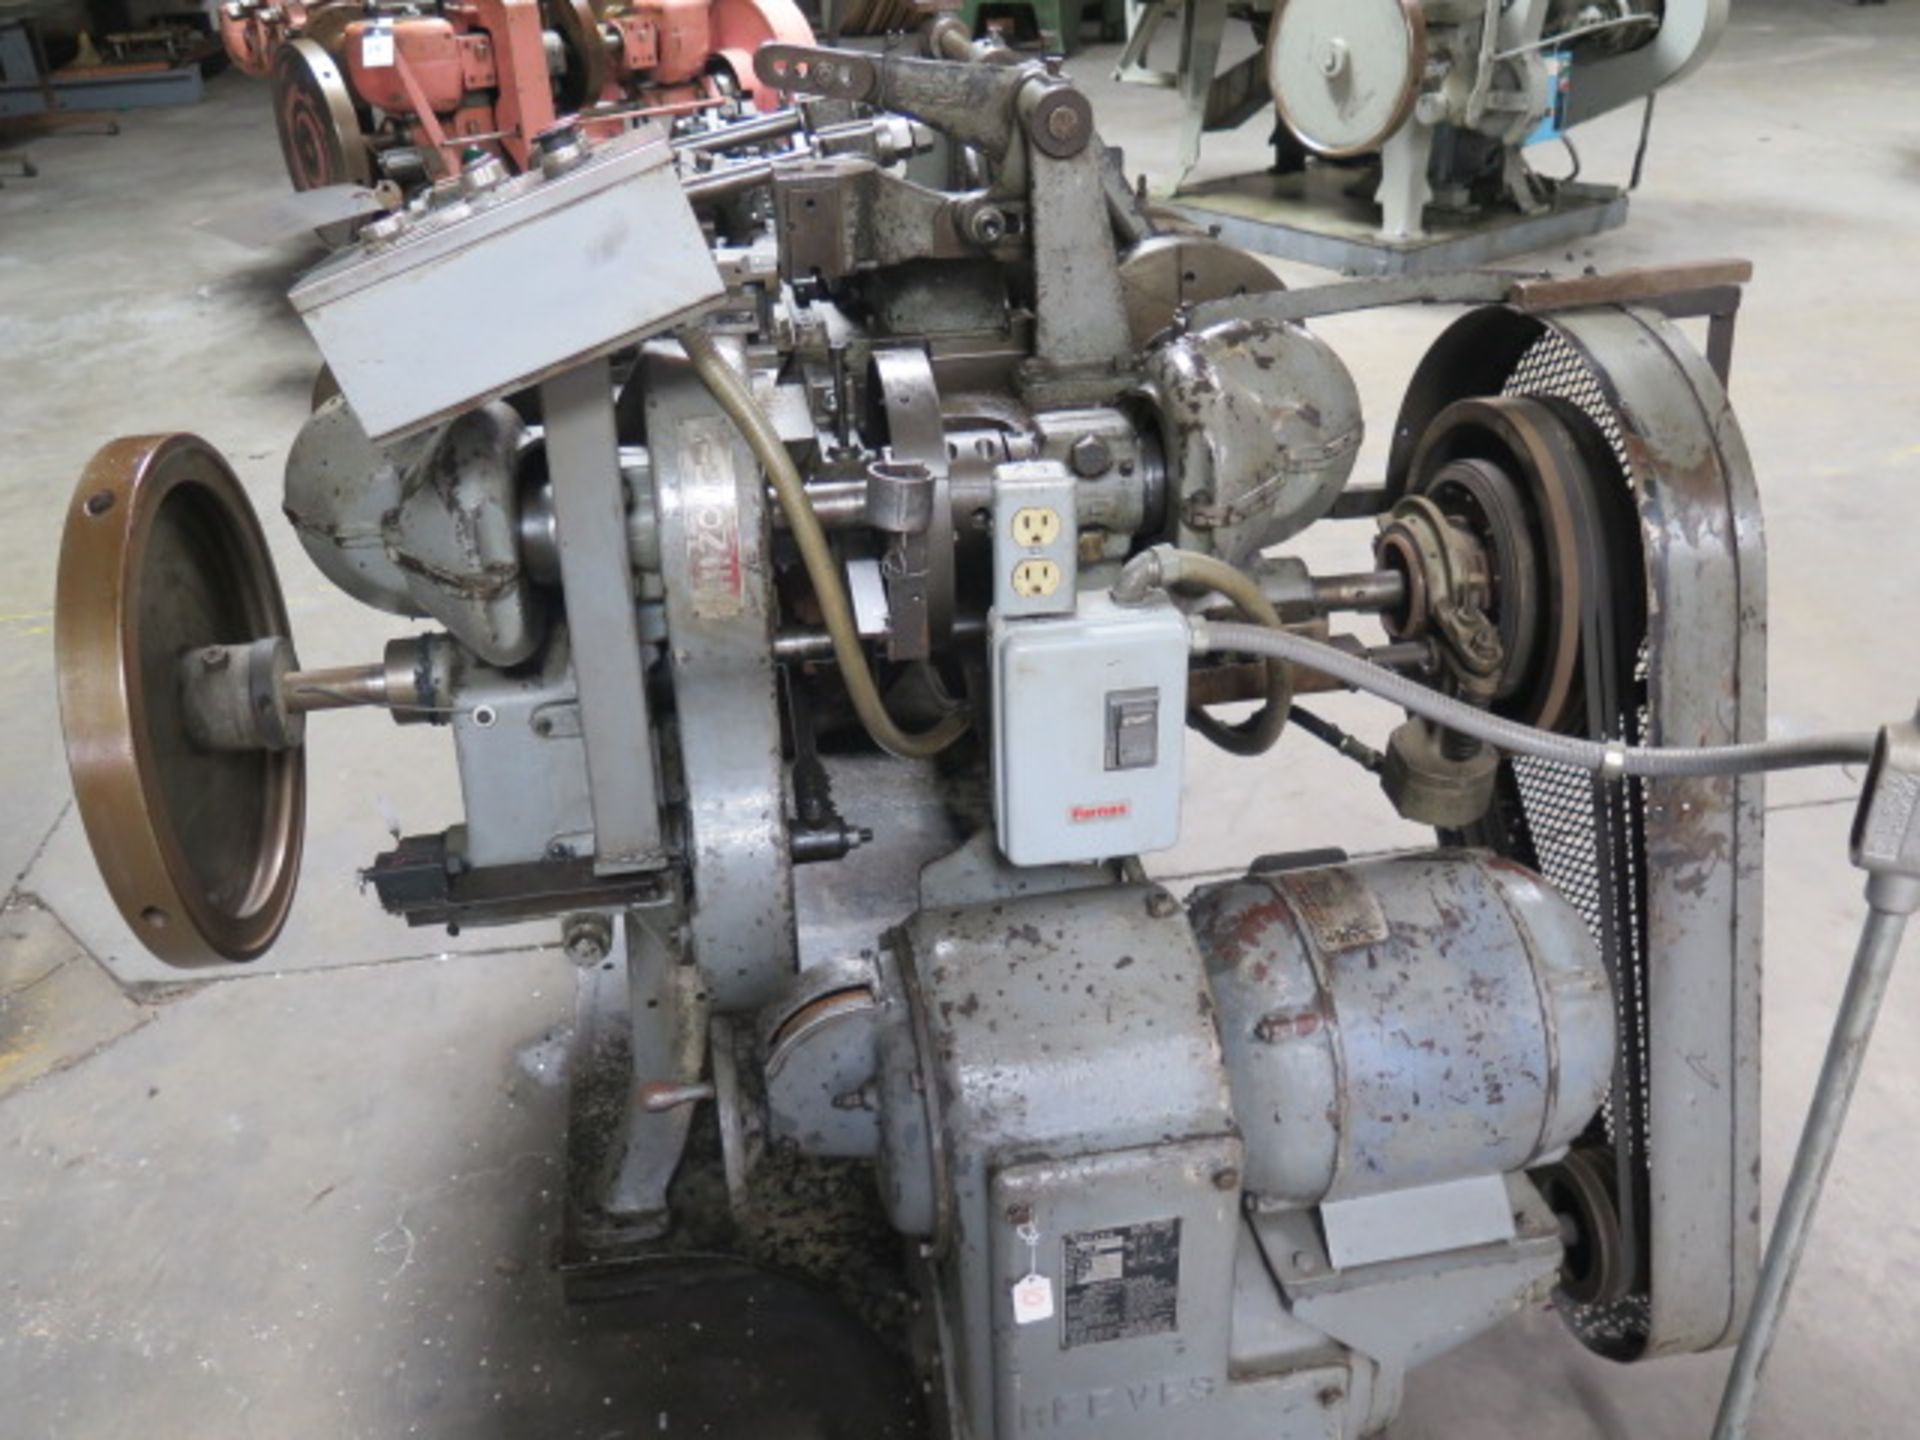 Nilson mdl. S-0 Four-Slide Machine s/n 66630 w/ Upgraded Controls, Pneumatic Clutch(AS IS - NO WARR) - Image 3 of 15